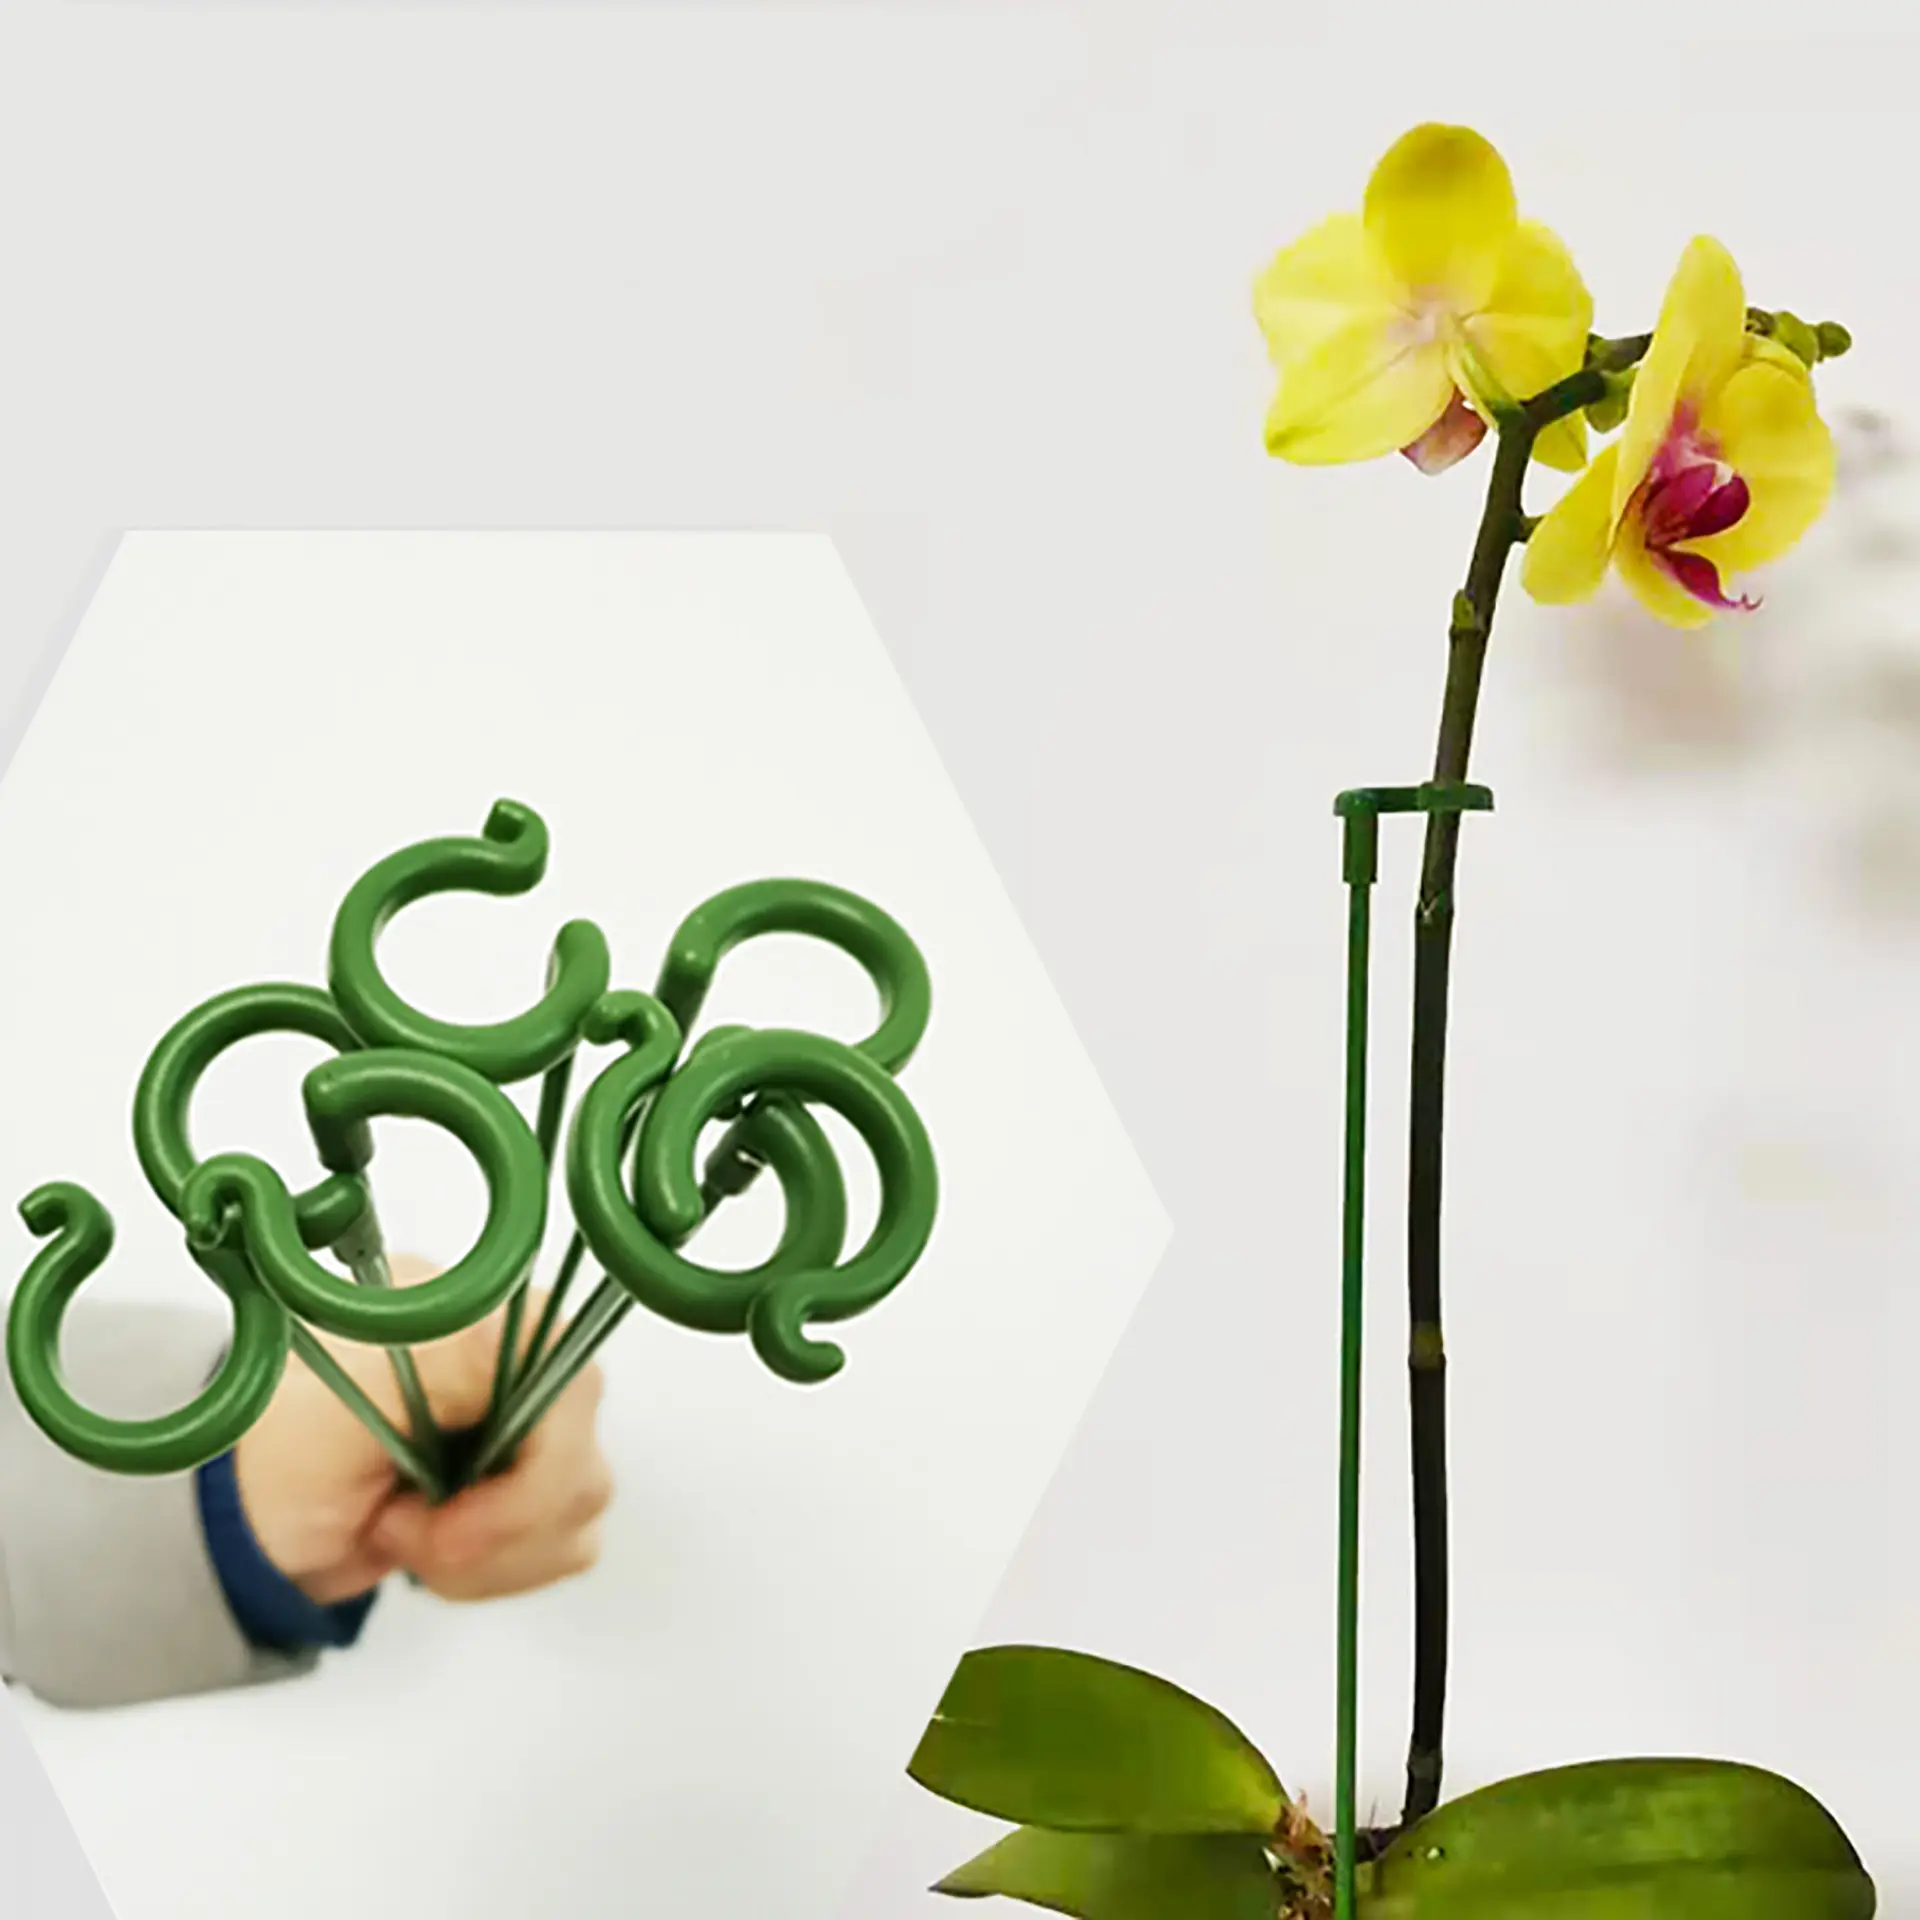 10pcs/bag Stem Plant Support Ring for Orchid Amaryllis Tomatoes Green Garden Plant Stakes Plant Sticks for Flowers Stem Support